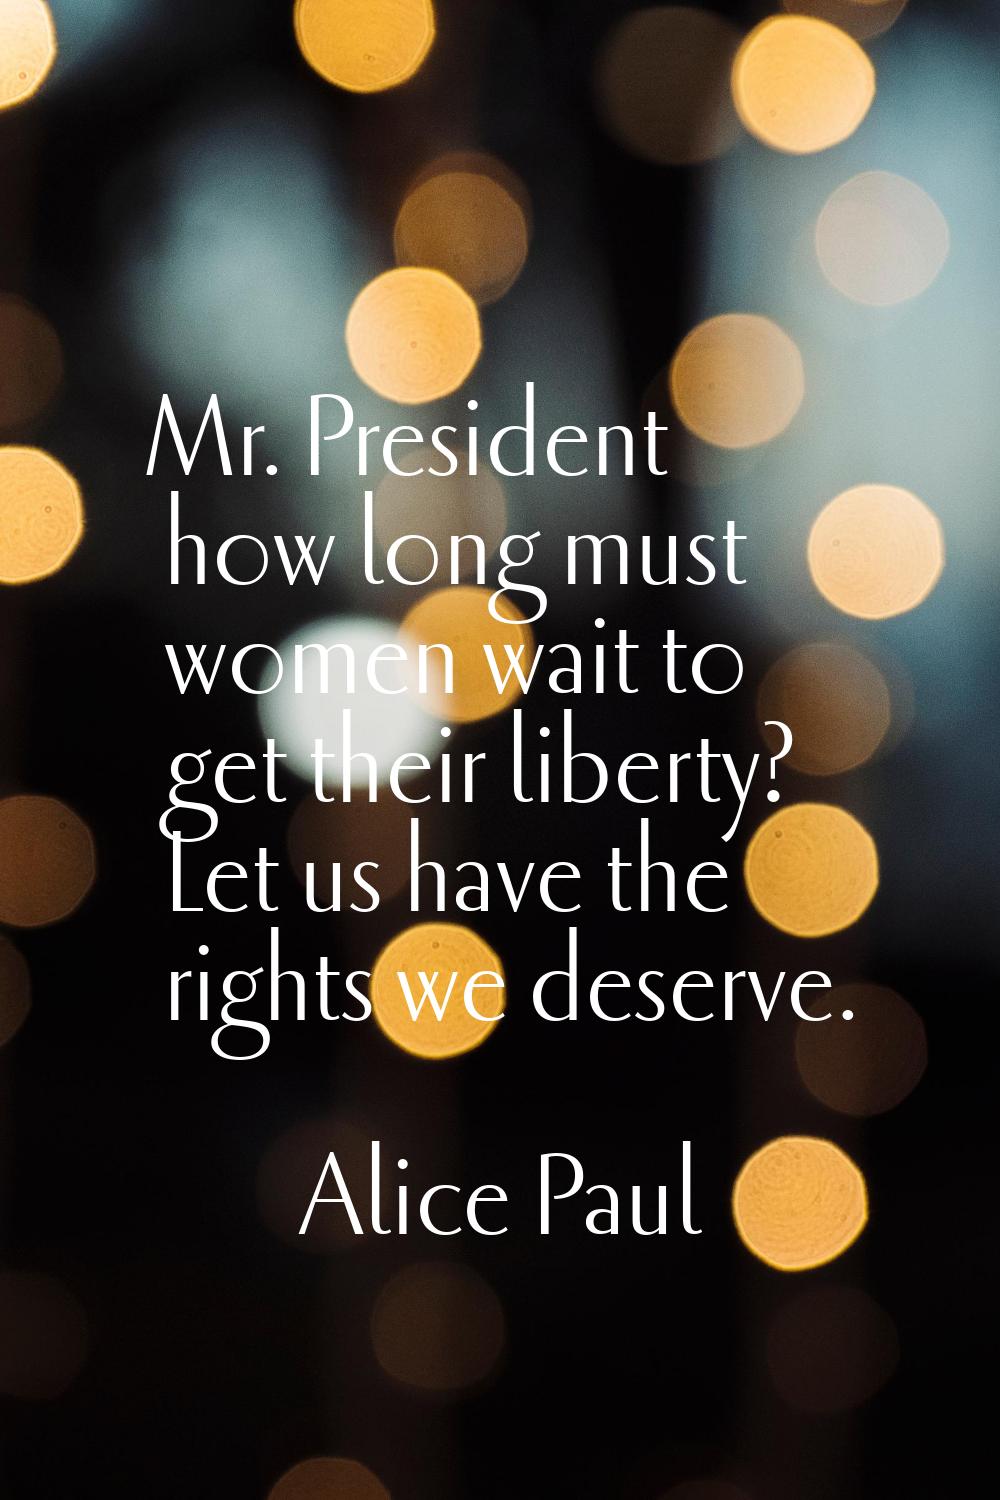 Mr. President how long must women wait to get their liberty? Let us have the rights we deserve.